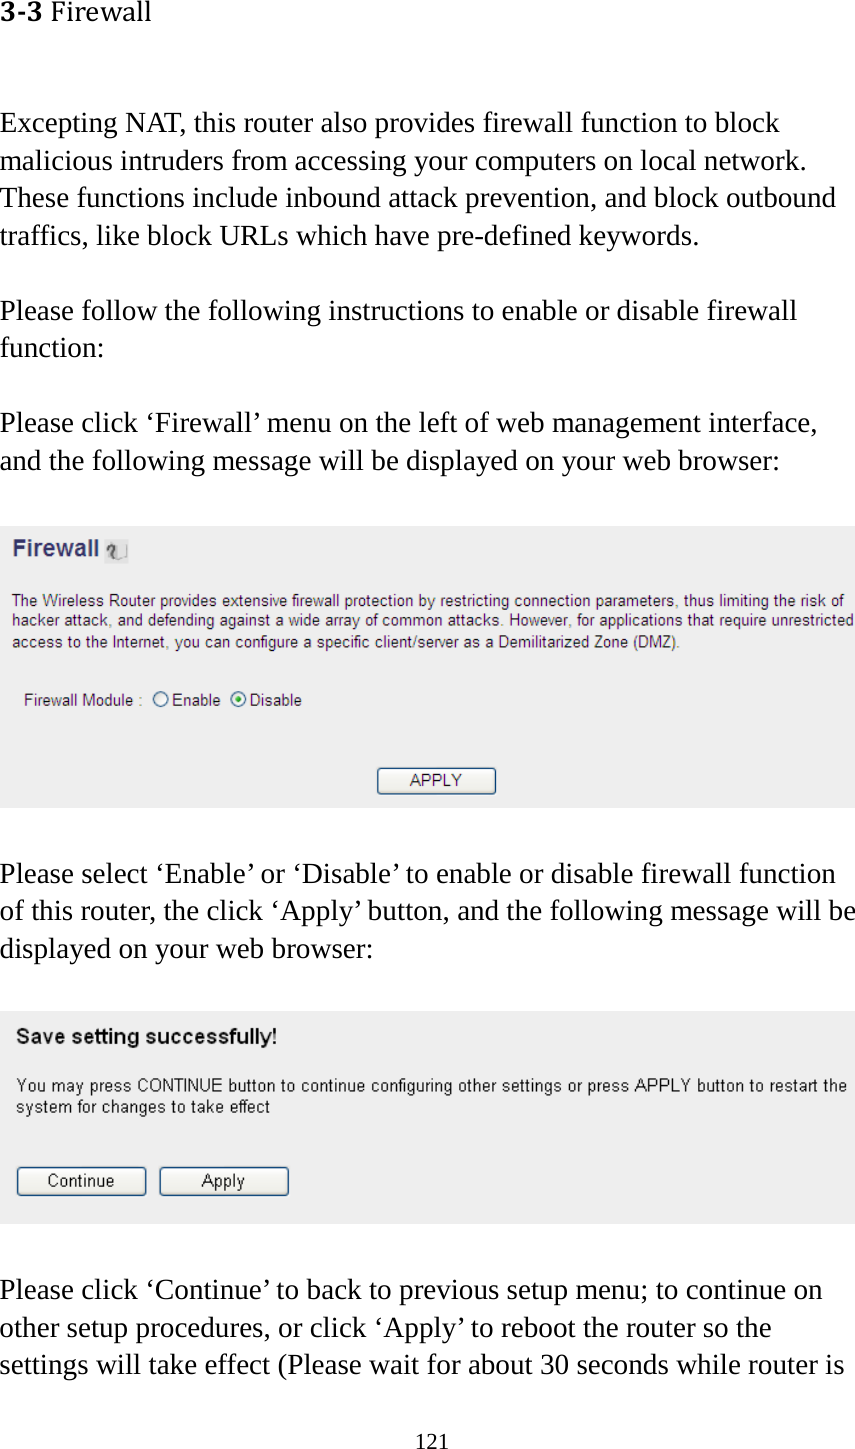 121 3-3 Firewall  Excepting NAT, this router also provides firewall function to block malicious intruders from accessing your computers on local network. These functions include inbound attack prevention, and block outbound traffics, like block URLs which have pre-defined keywords.  Please follow the following instructions to enable or disable firewall function:  Please click ‘Firewall’ menu on the left of web management interface, and the following message will be displayed on your web browser:    Please select ‘Enable’ or ‘Disable’ to enable or disable firewall function of this router, the click ‘Apply’ button, and the following message will be displayed on your web browser:    Please click ‘Continue’ to back to previous setup menu; to continue on other setup procedures, or click ‘Apply’ to reboot the router so the settings will take effect (Please wait for about 30 seconds while router is 